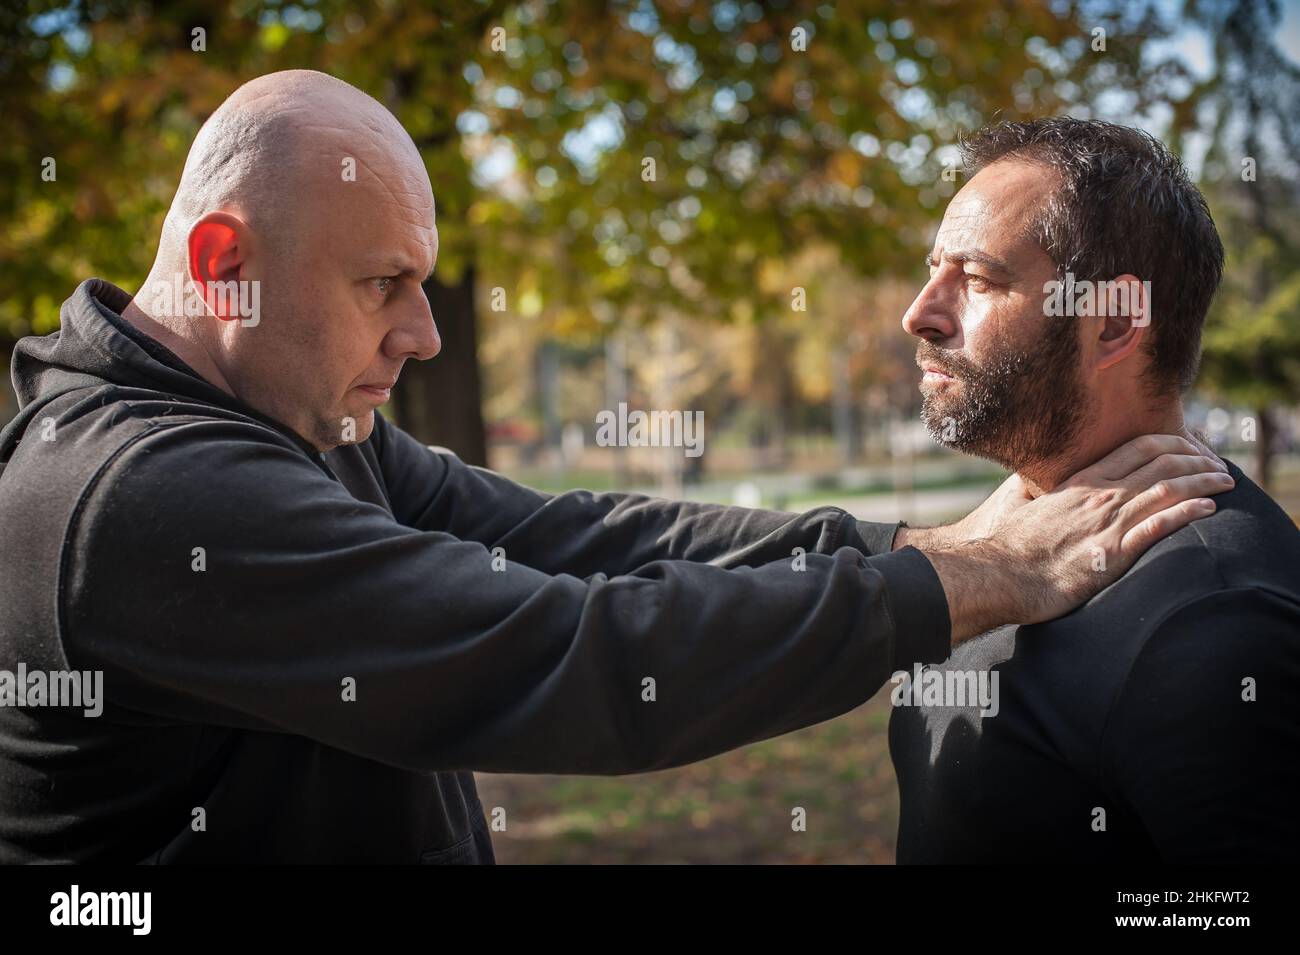 Two men quarrel and fight. Two thugs are fighting. Physical confrontation of people outside on the street Stock Photo